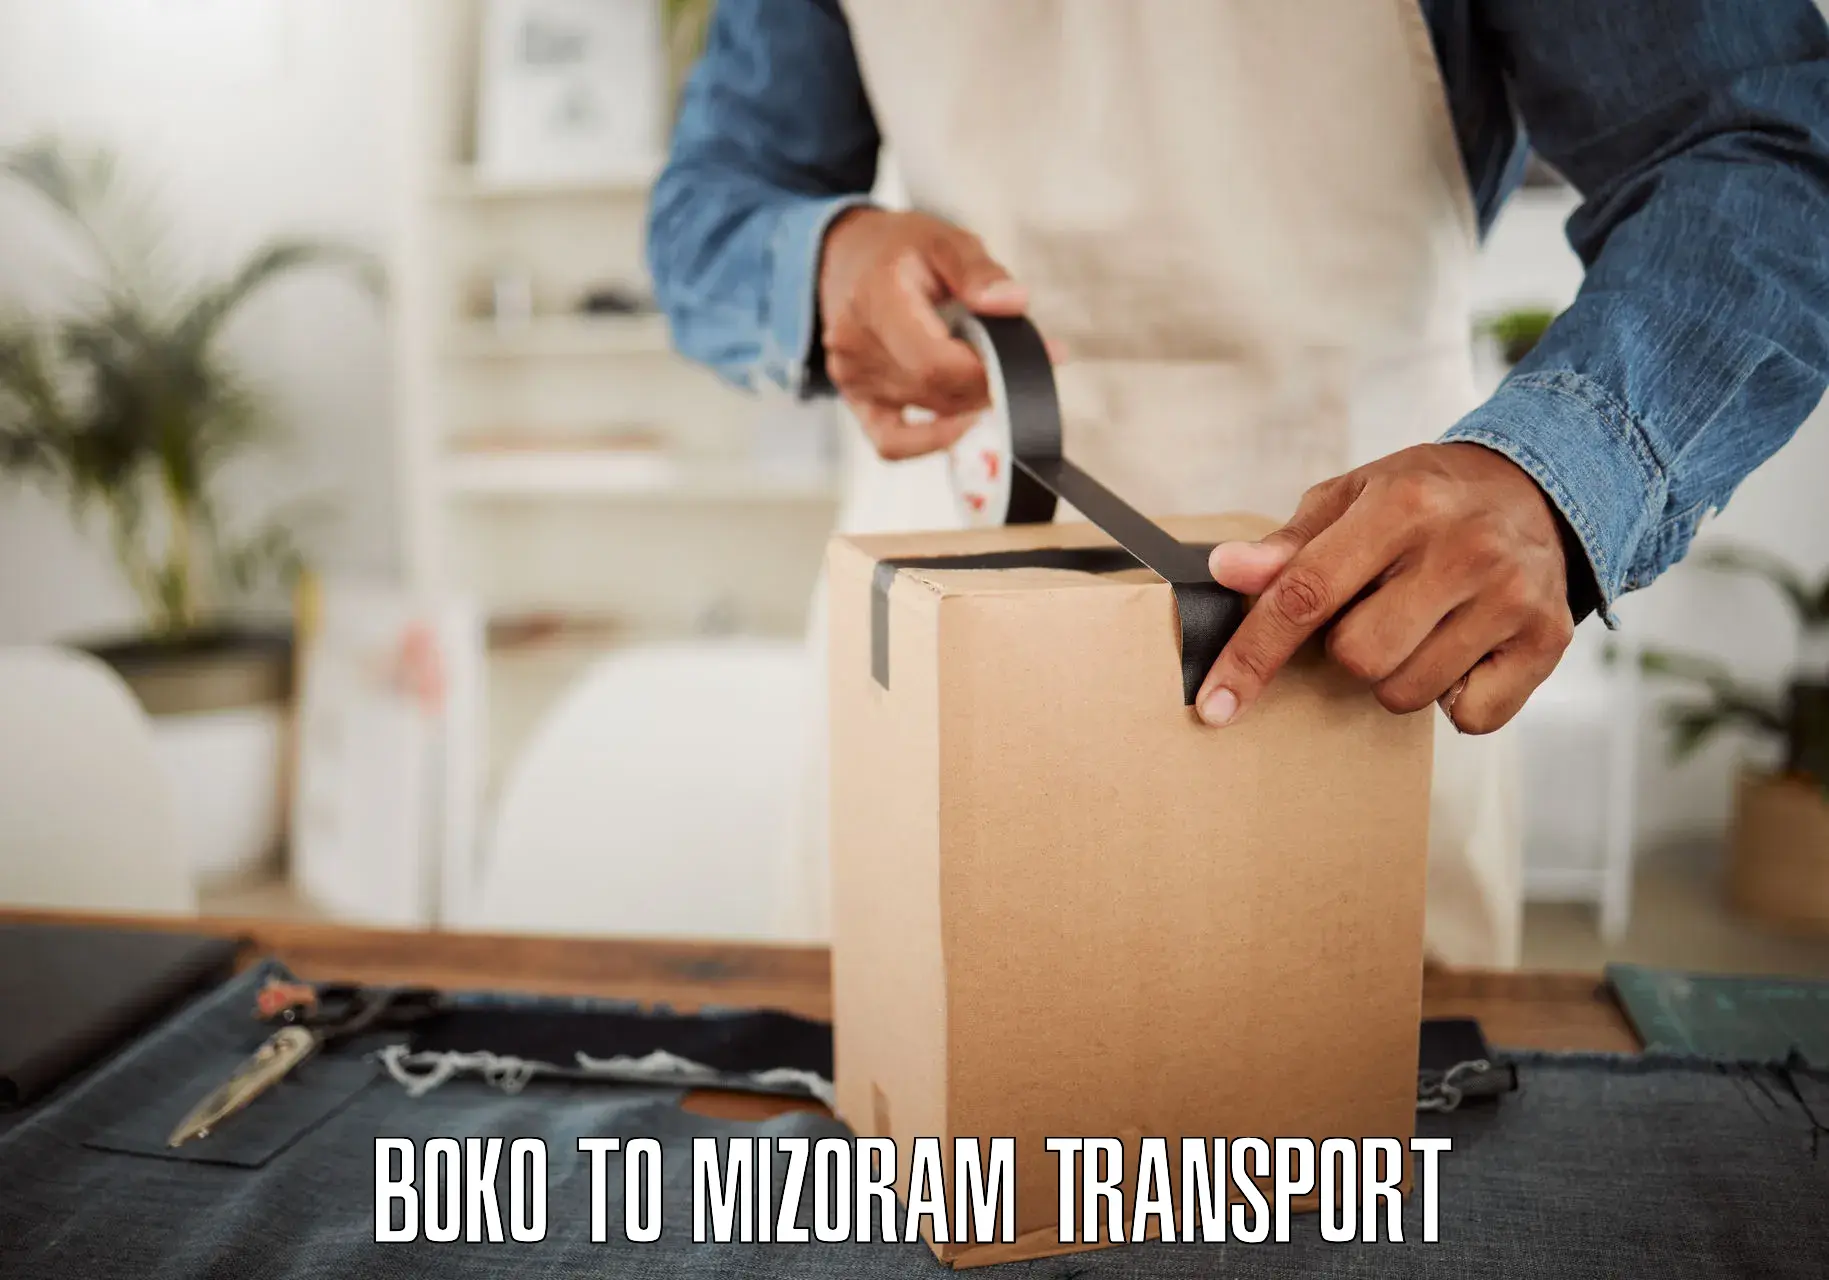 Delivery service in Boko to Aizawl